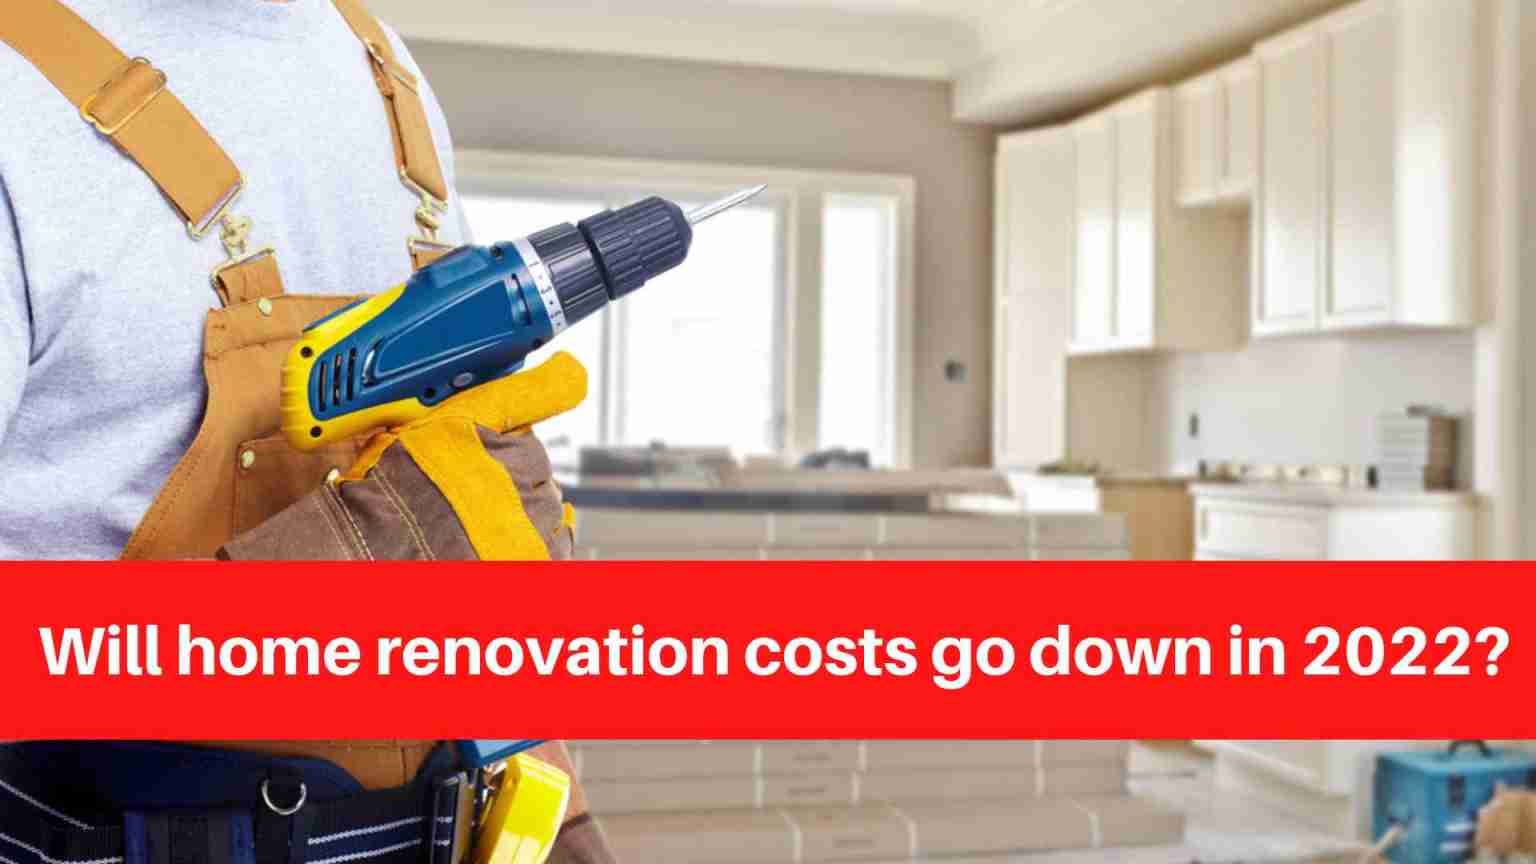 Will home renovation costs go down in 2022